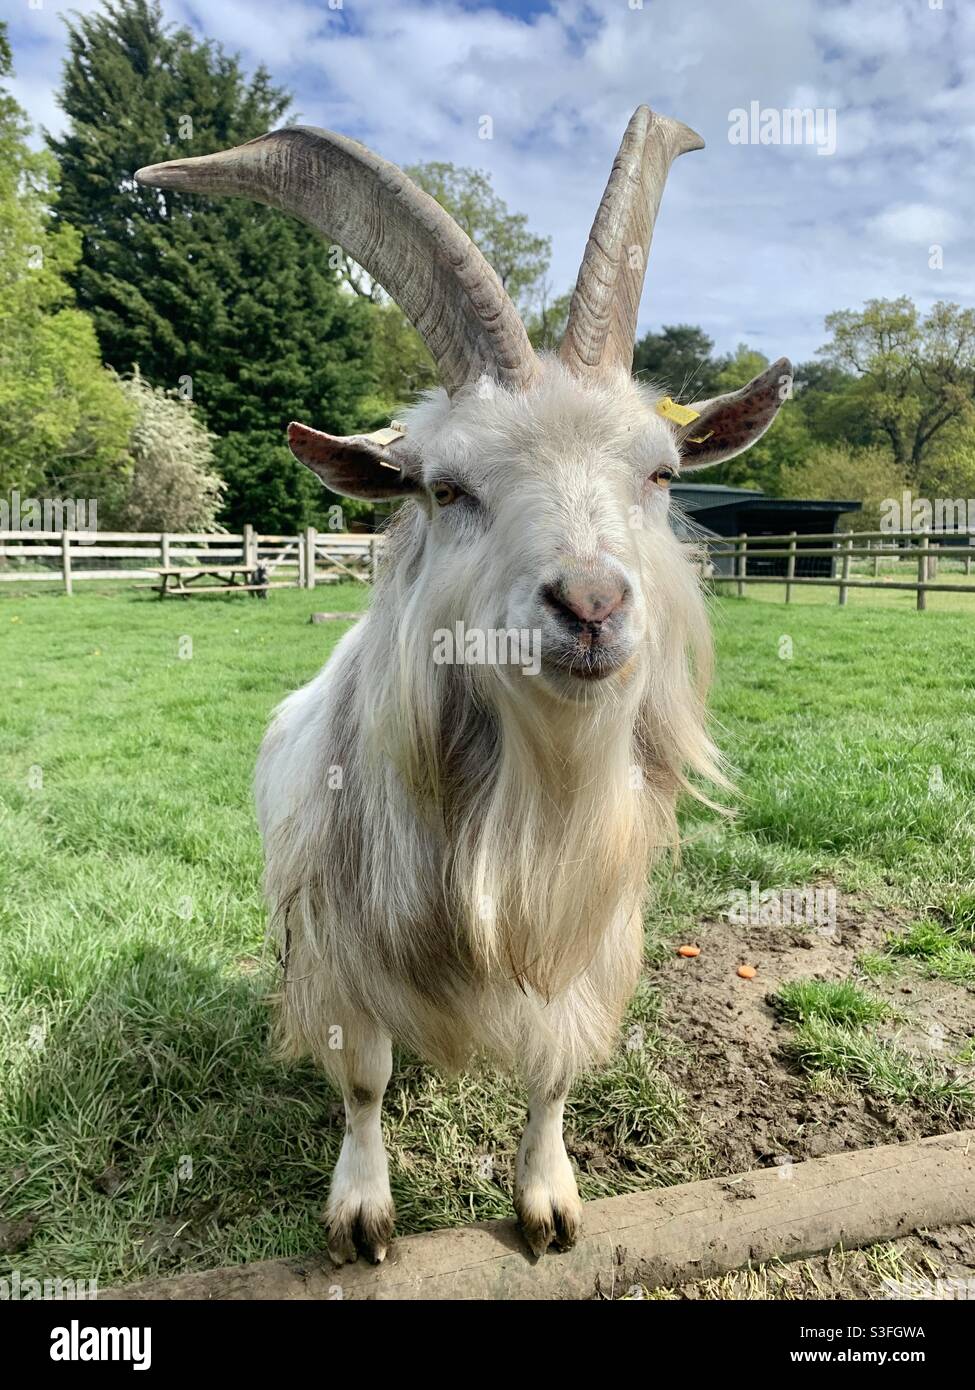 White goat with long hair and long horns in field Stock Photo